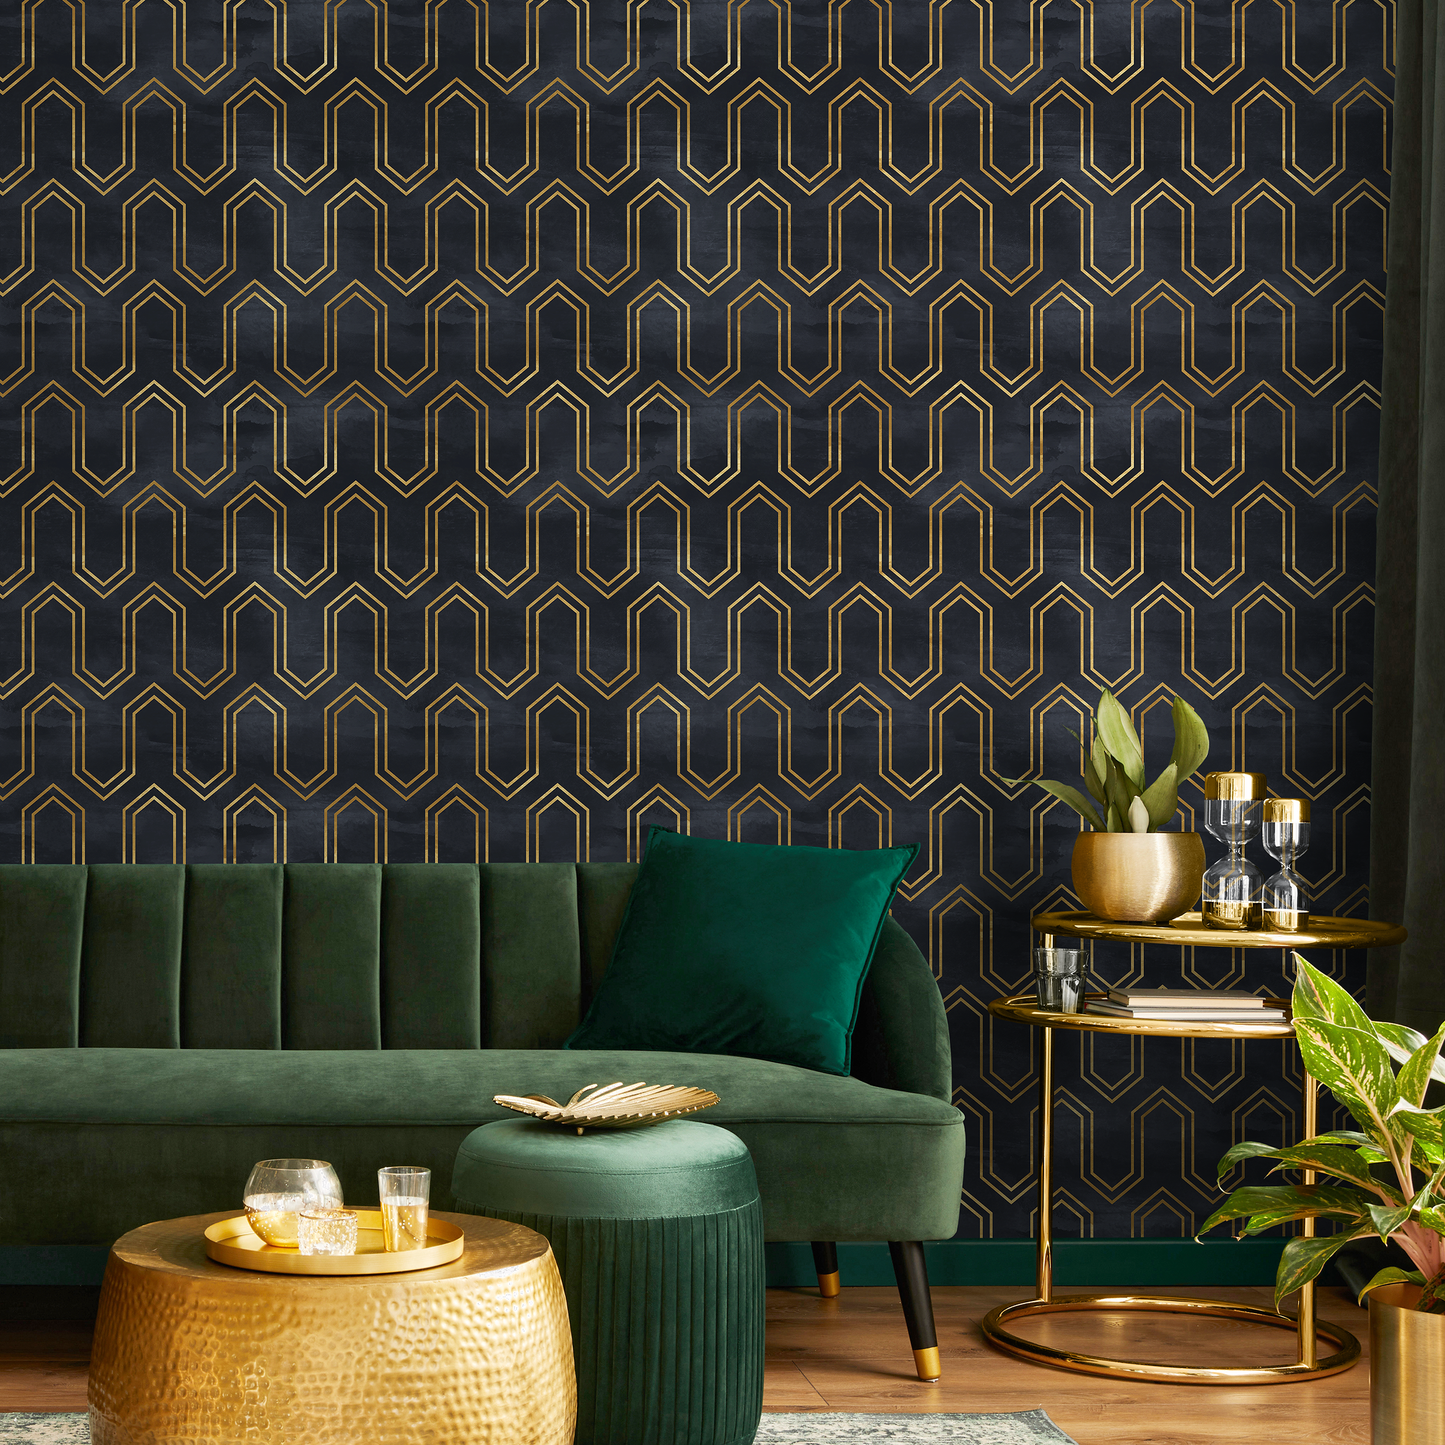 Removable Wallpaper Peel and Stick Wallpaper Wall Paper Wall Mural - Art Deco Black and Non-Metalic Yellow Gold Color - A436